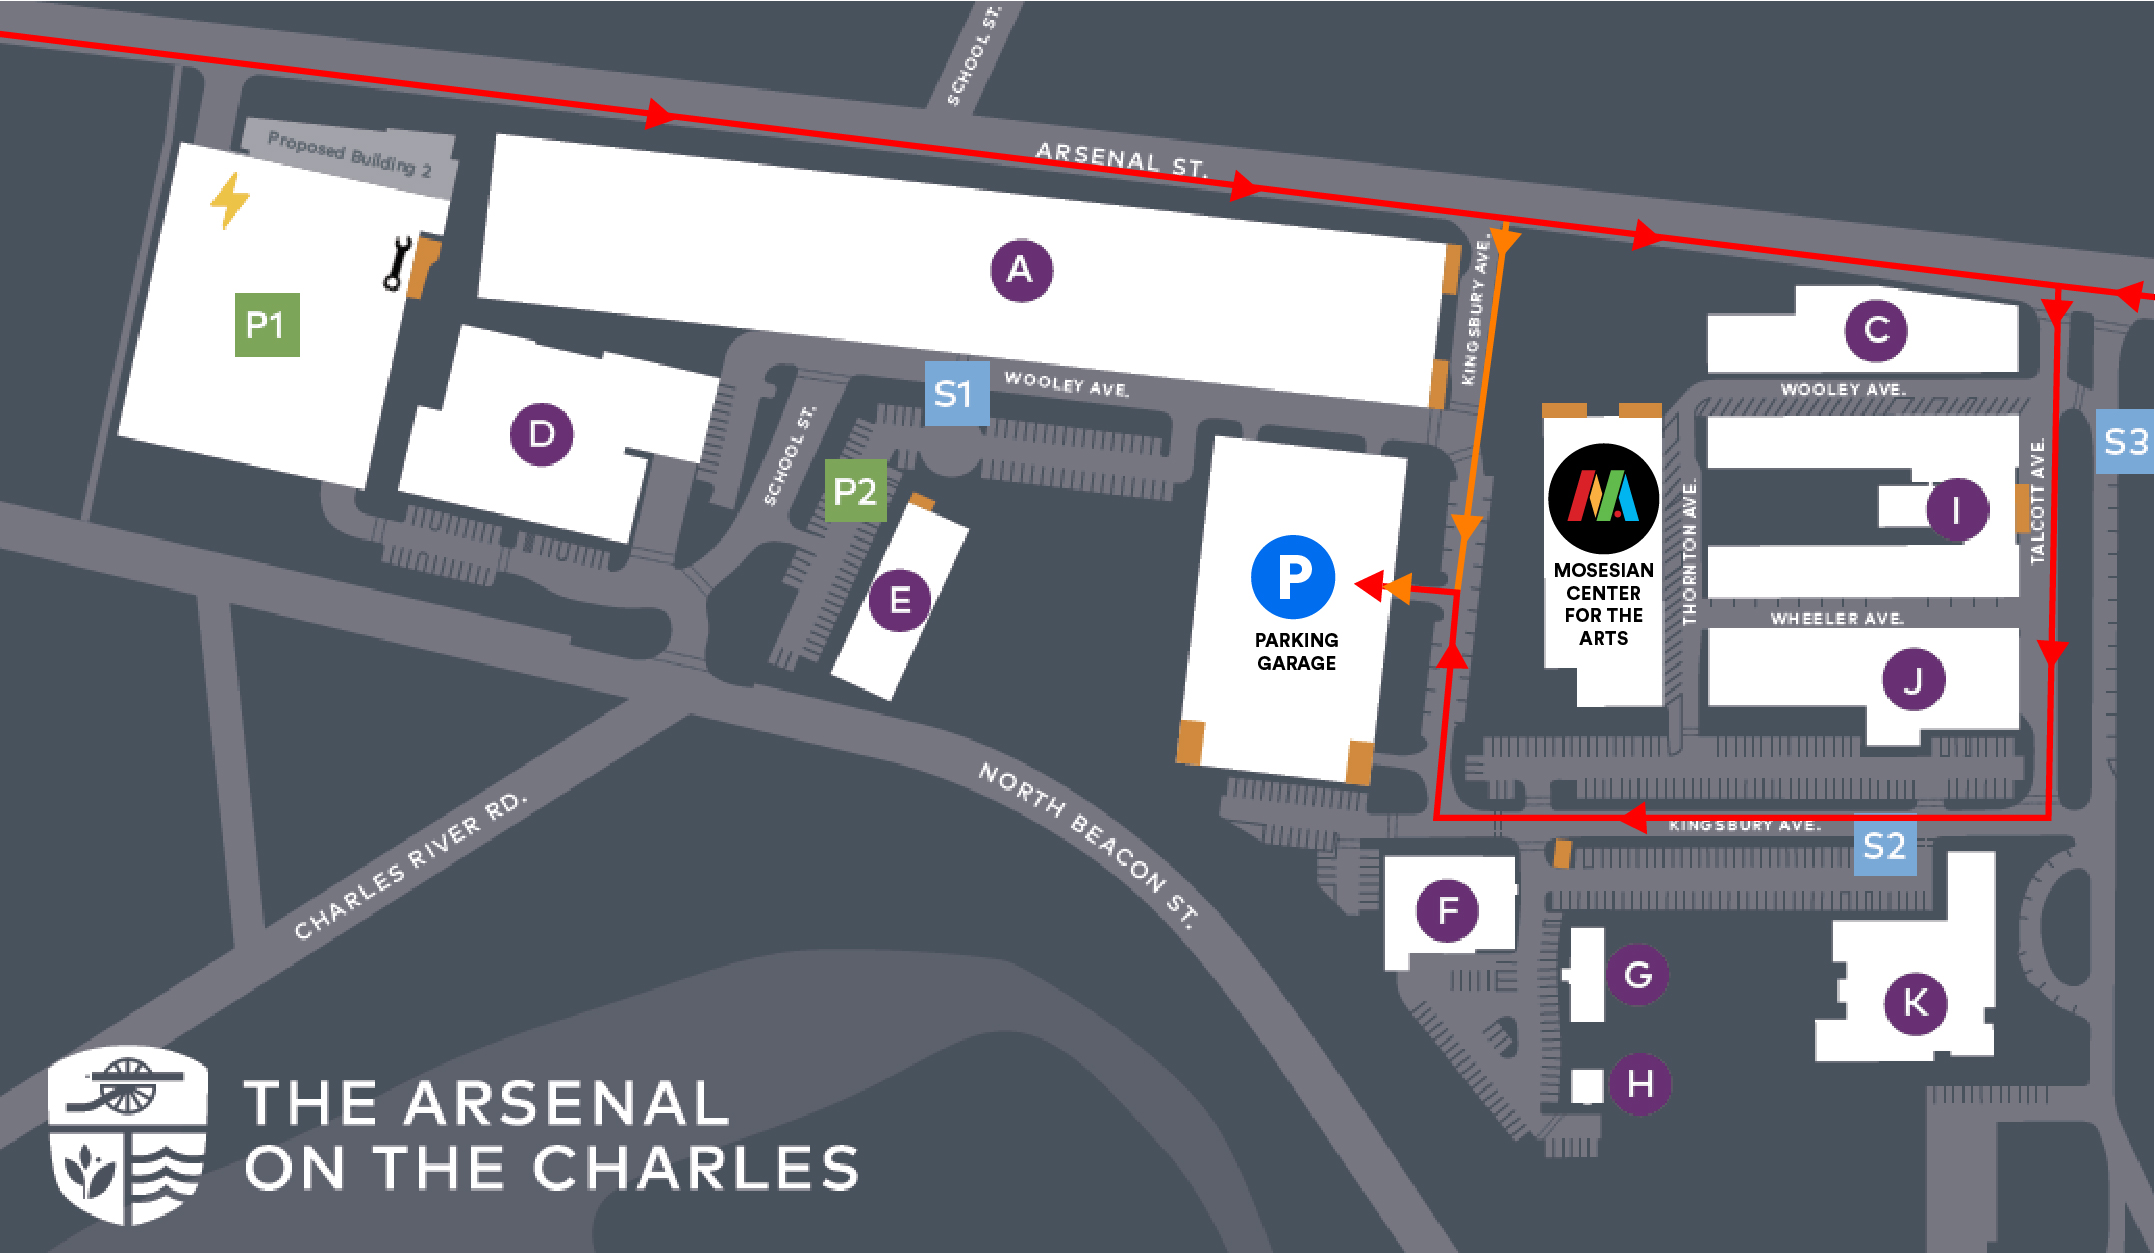 Arsenal on the Charles Campus Map